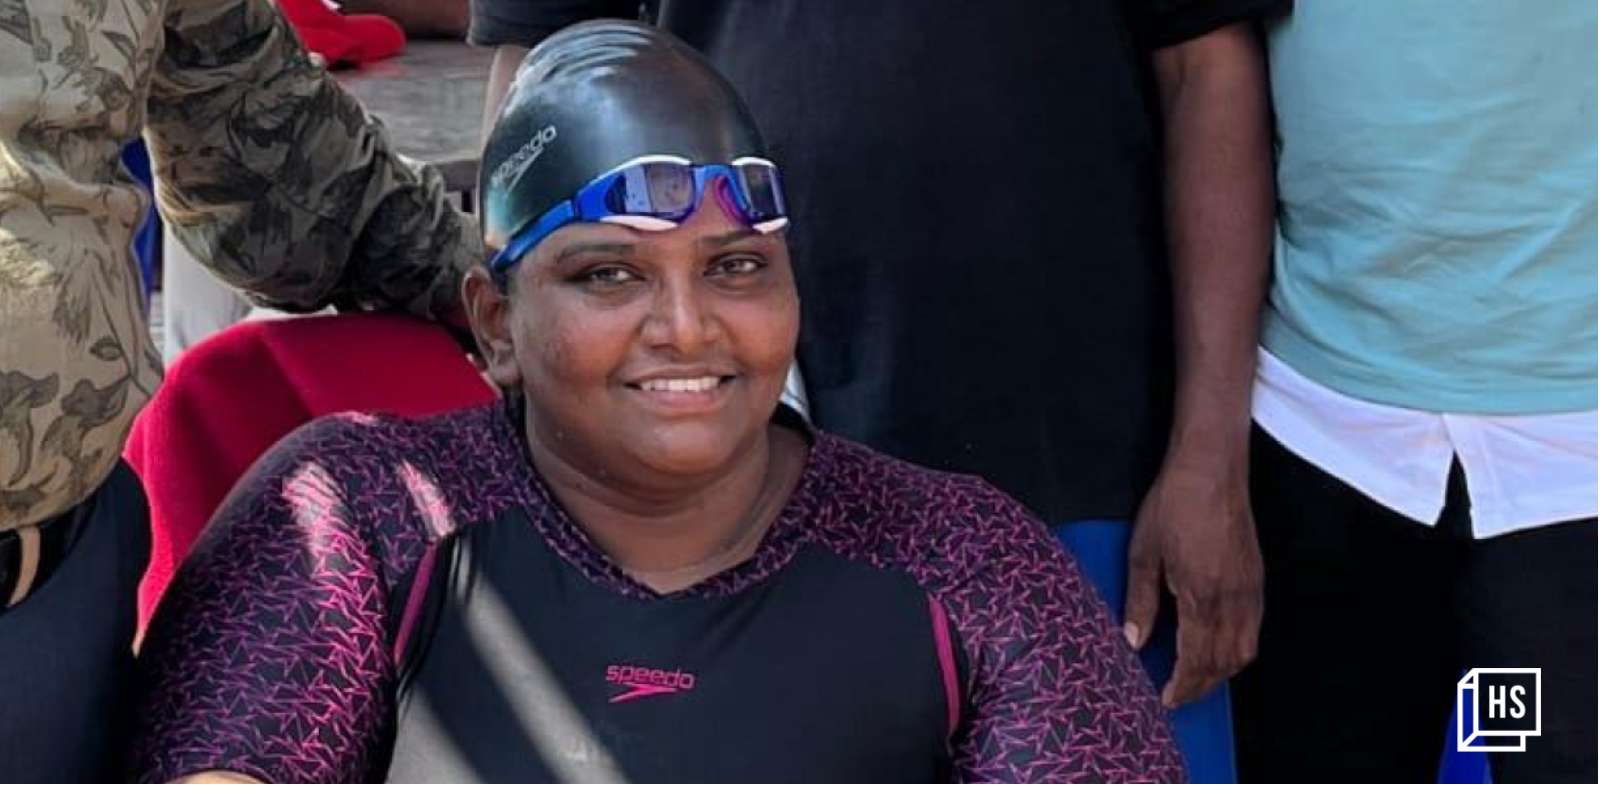 Winning with disability: How this Chennai woman with polio became a swimming champion